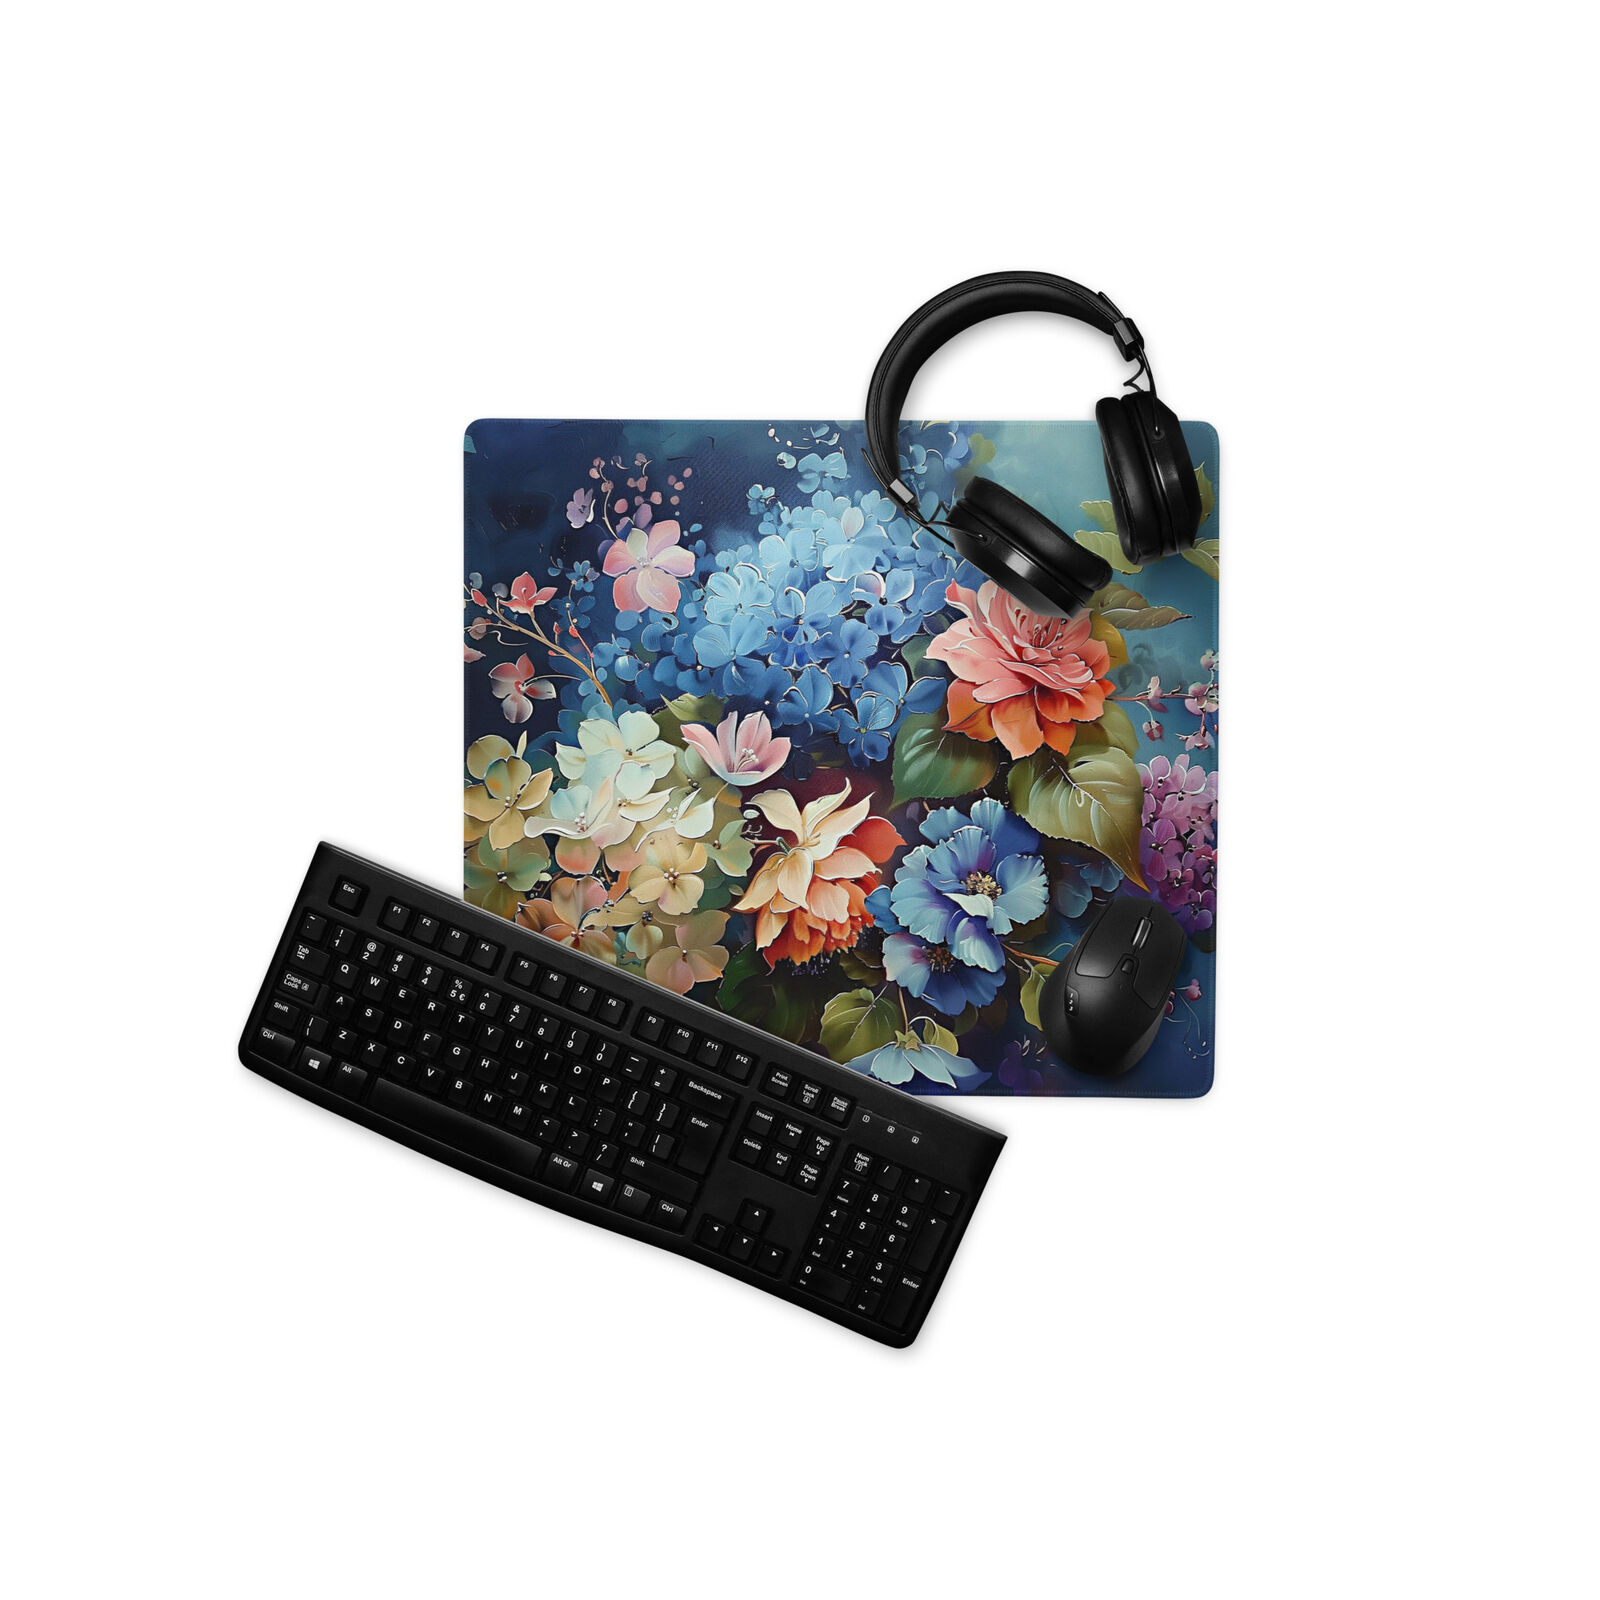 Hydrangeas Gaming Mouse Pad, Floral Mousepad, Roses Extended Deskmat